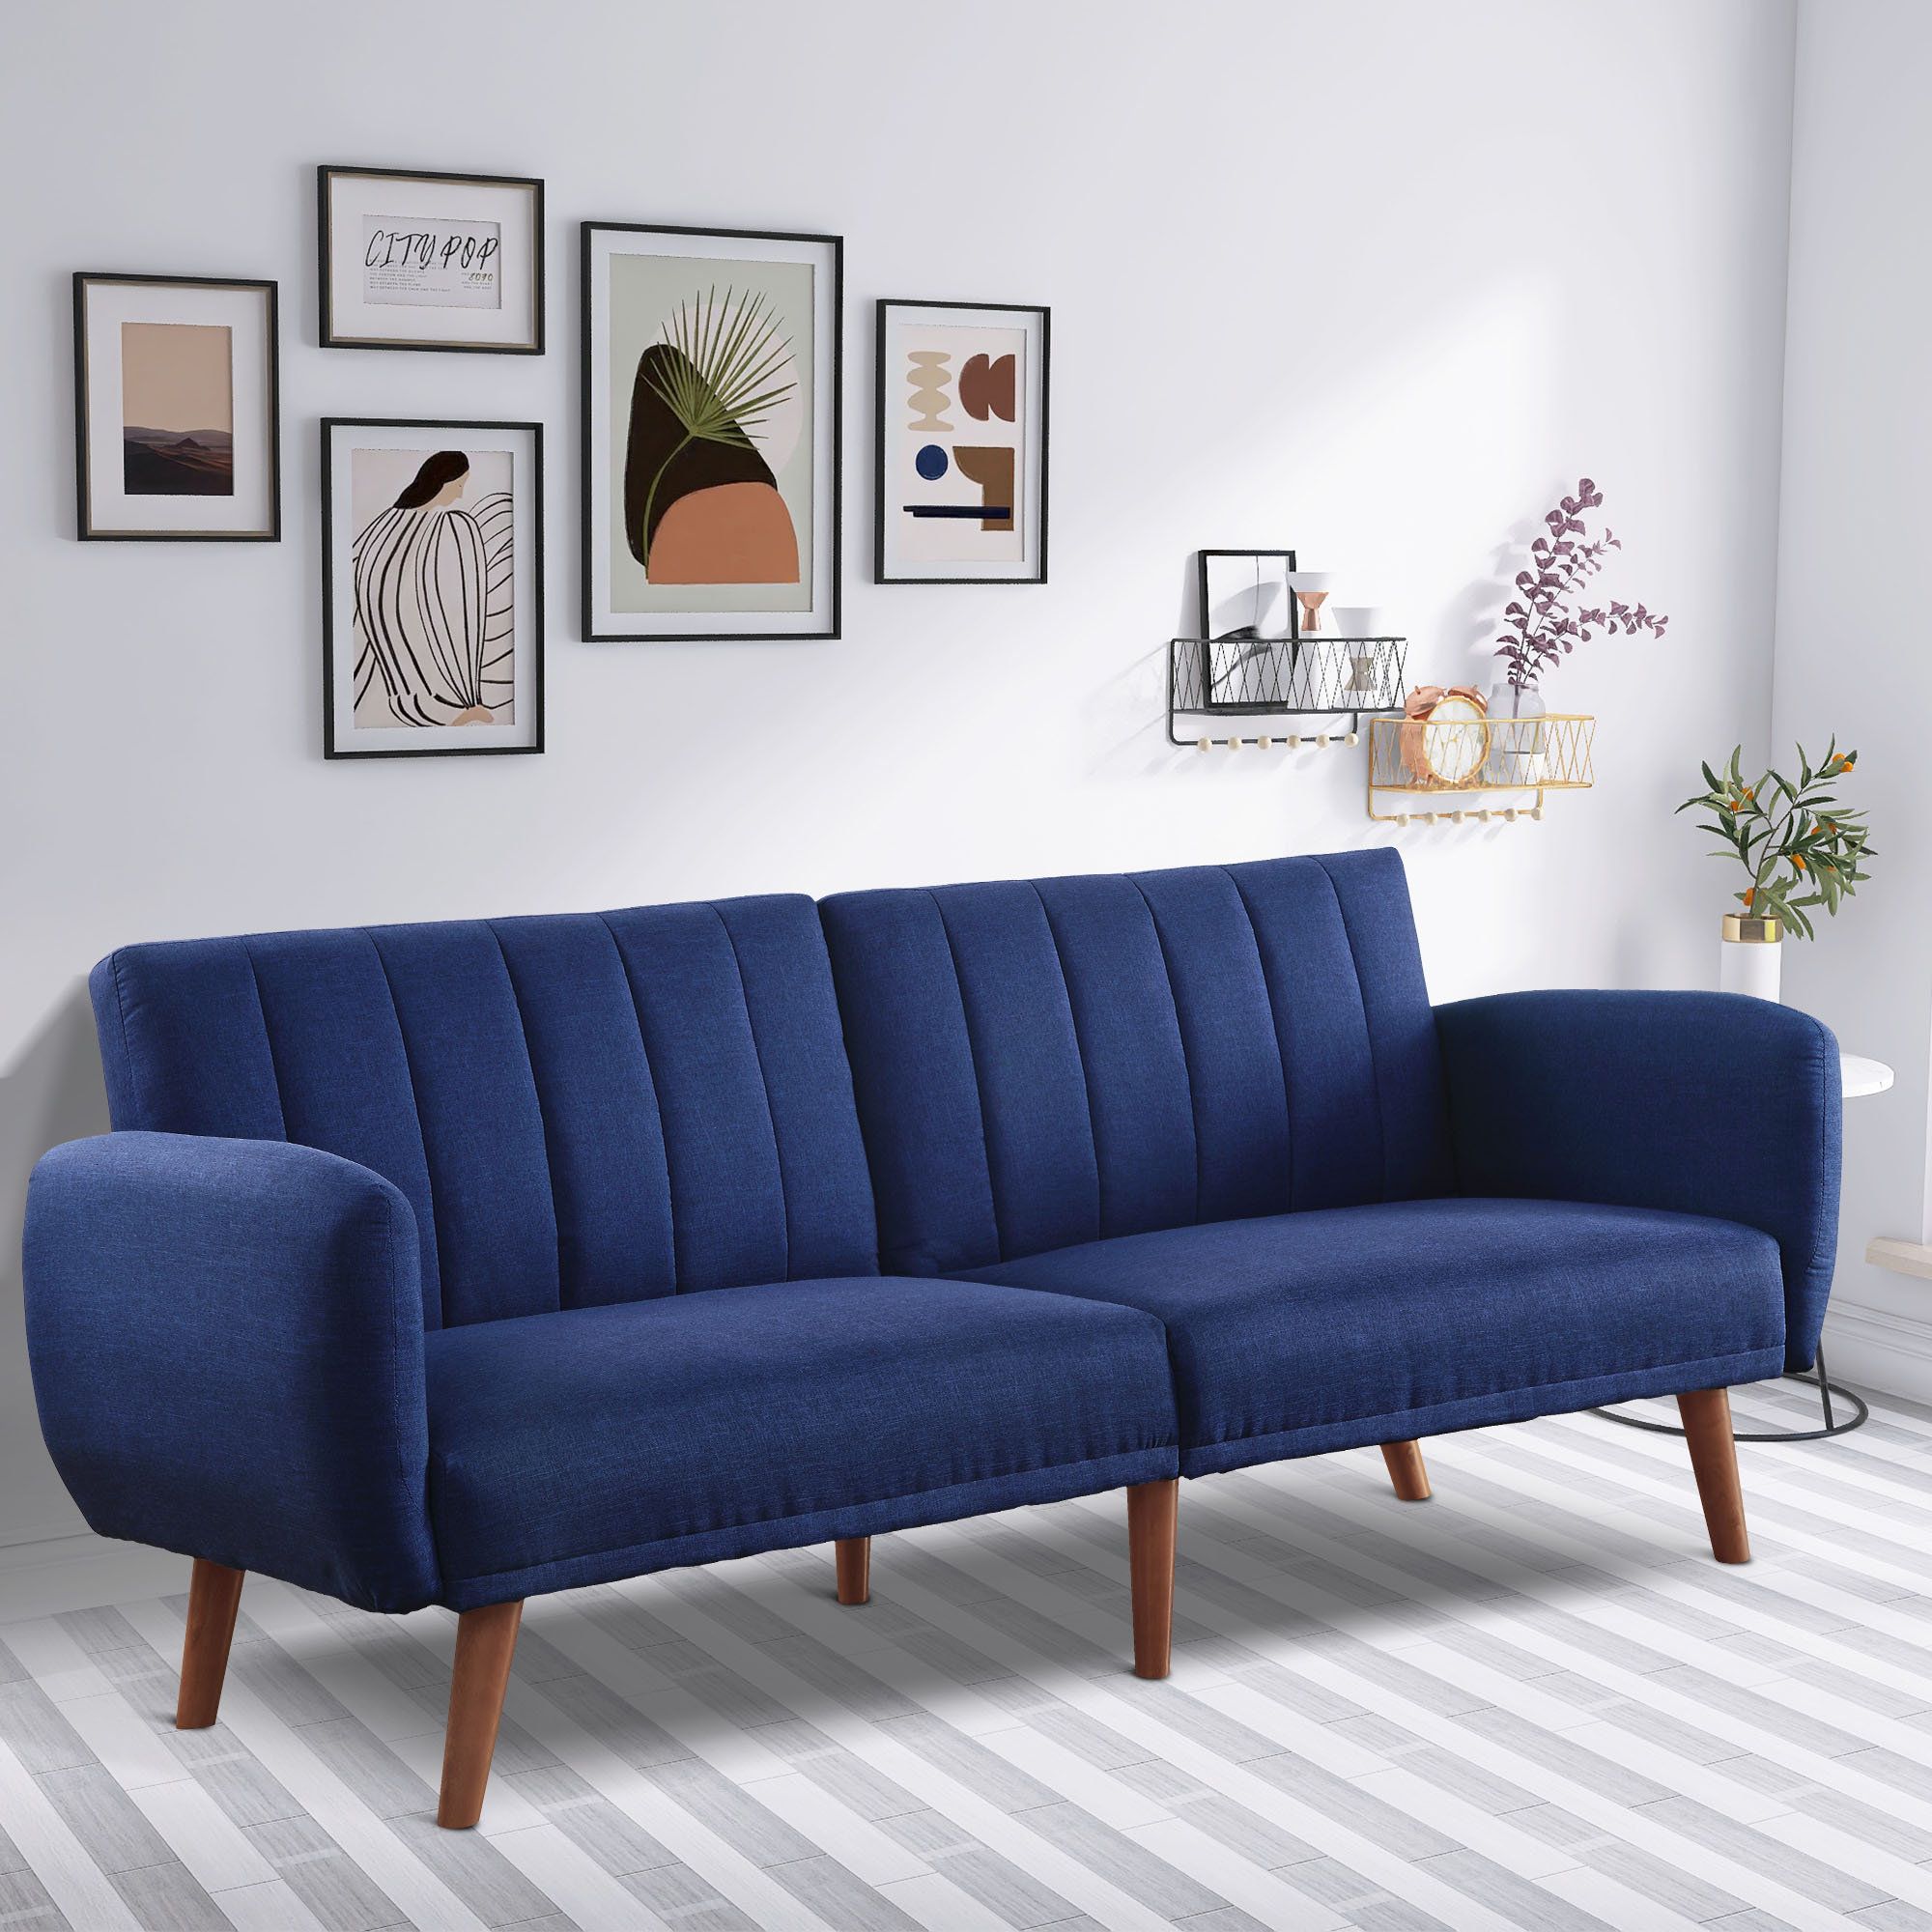 Wade Logan® Argene 76" Upholstered Tight Back Convertible Sofa | Wayfair With Navy Linen Coil Sofas (View 7 of 15)